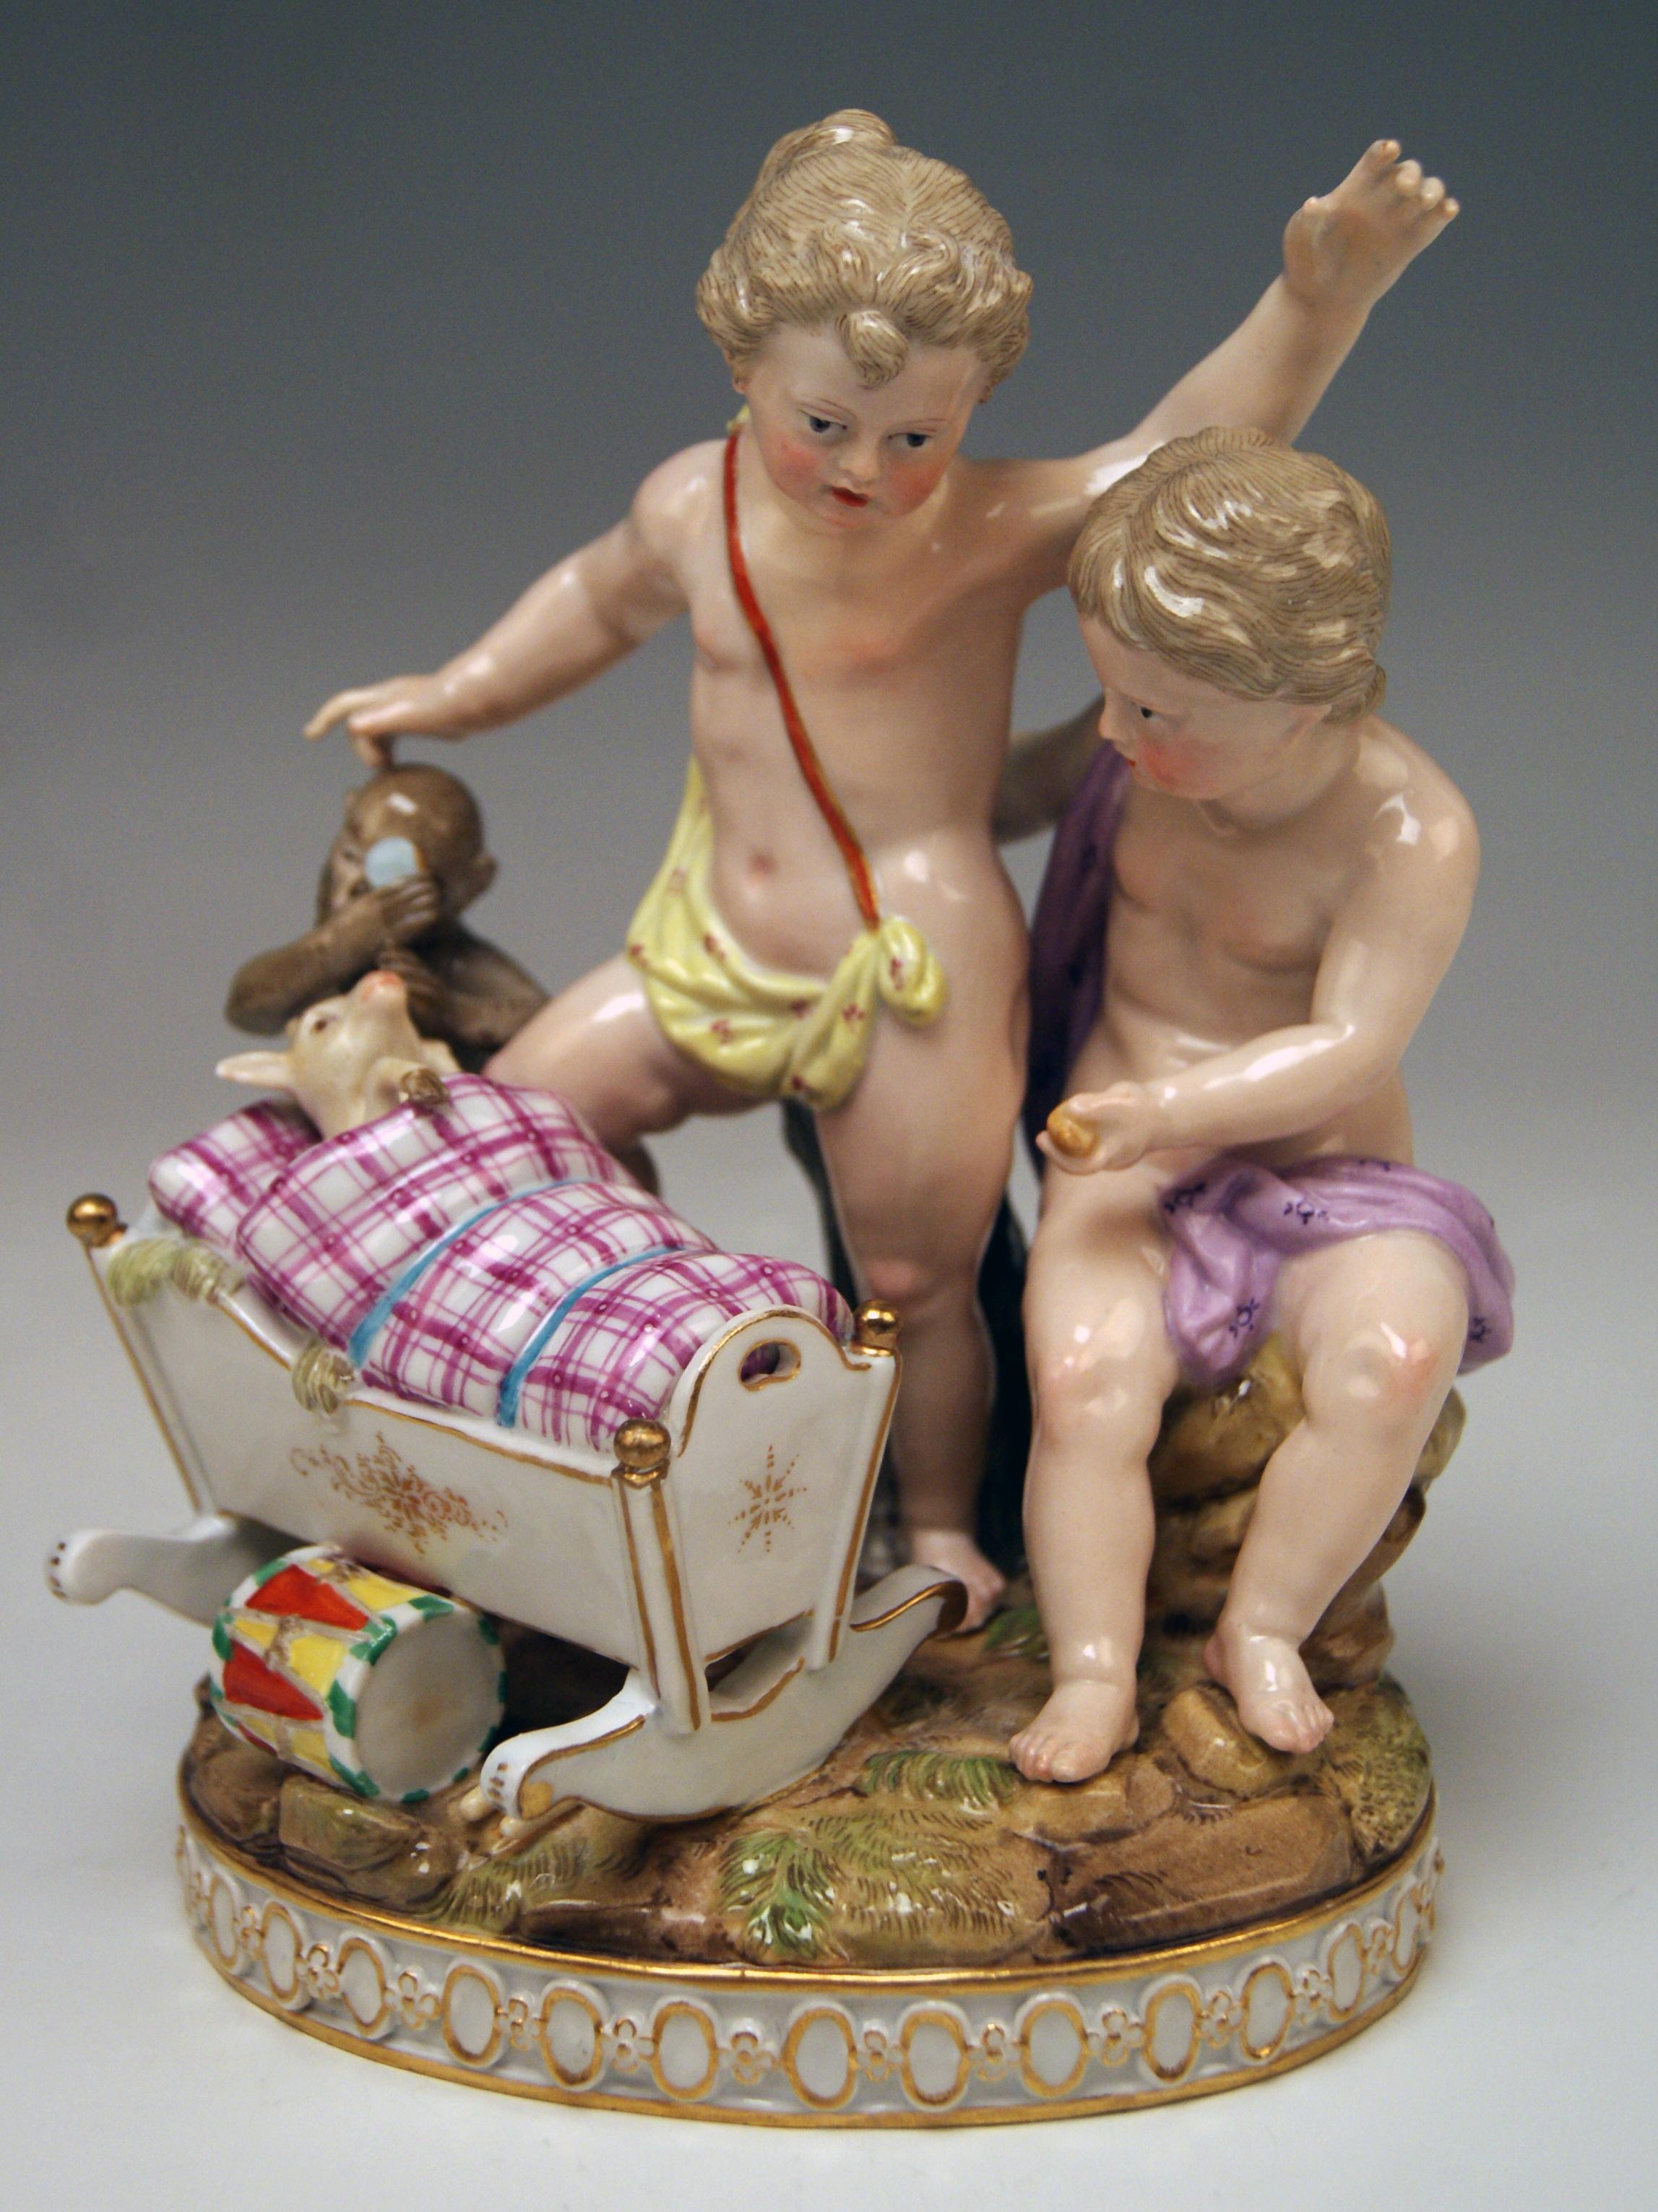 Meissen most lovely figurine group: Children with monkey and goat 

Measures / Dimensions:
height 6.49 inches / 16.5 cm 
width 4.92 inches / 12.5 cm
depth 3.62 inches / 9.2 cm

Manufactory: Meissen
Hallmarked: Blue Meissen Sword Mark (glazed